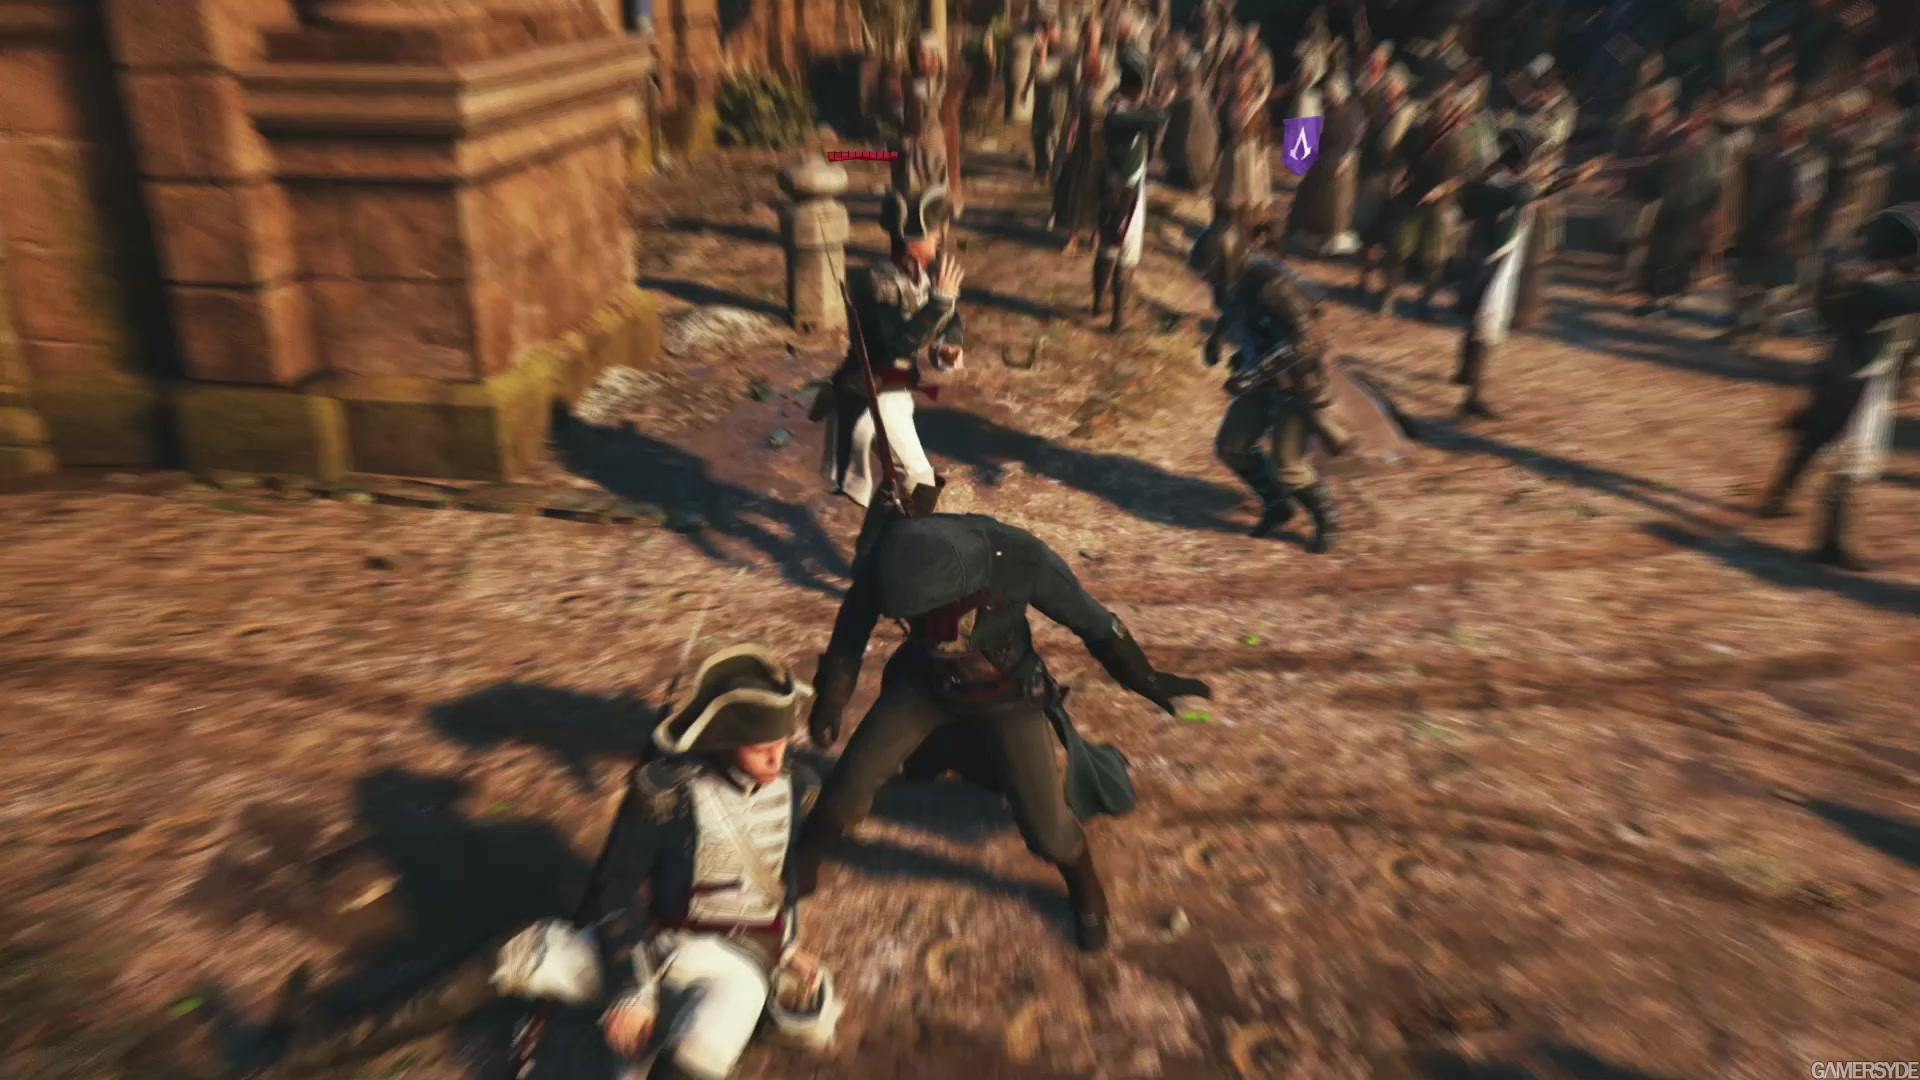 http://images.gamersyde.com/image_assassin_s_creed_unity-25265-2908_0008.jpg